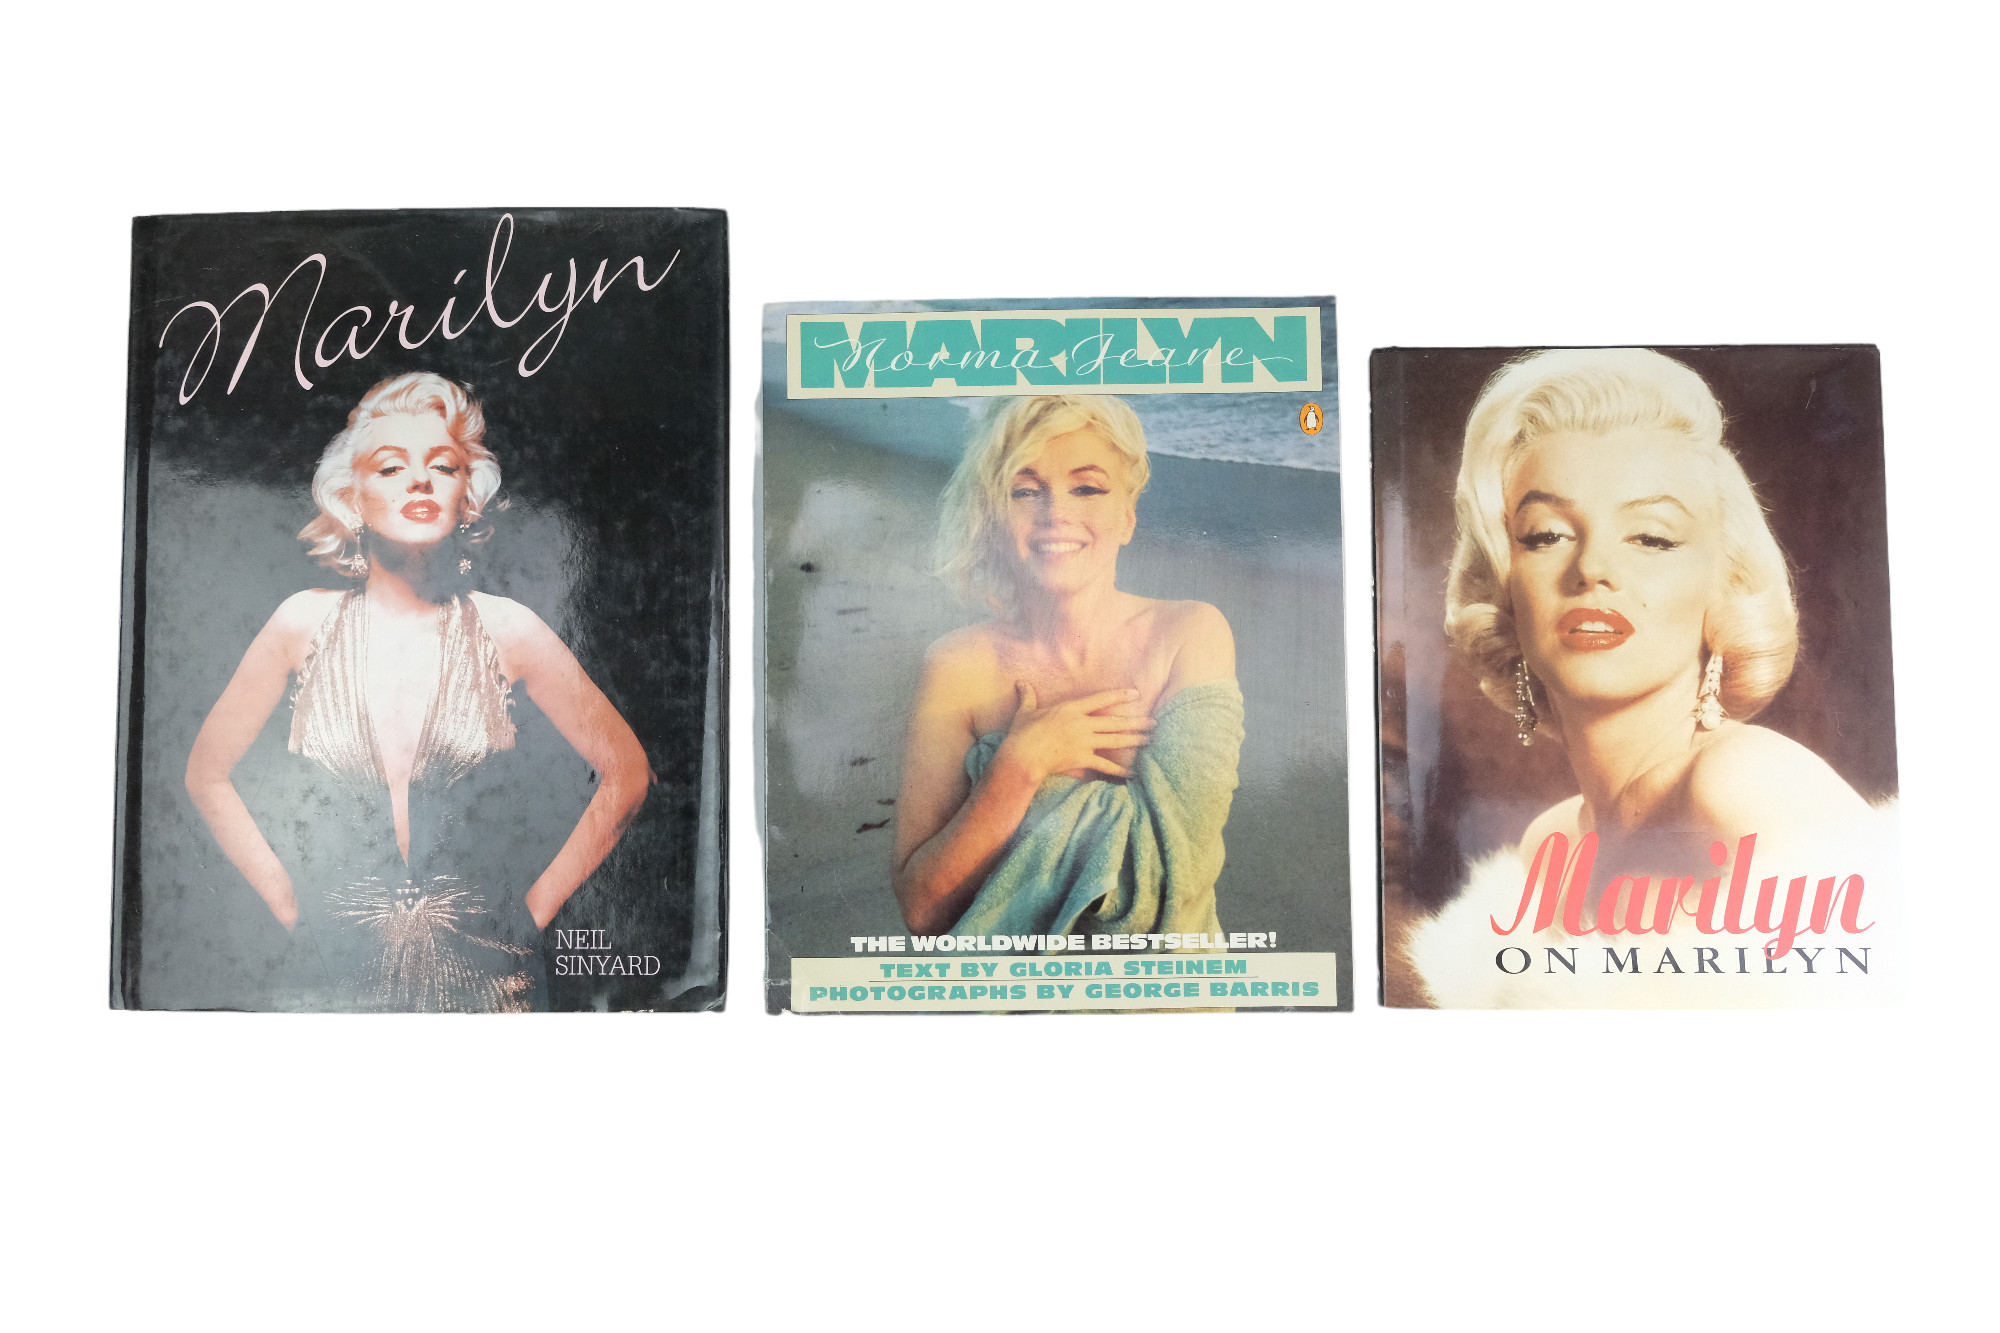 A collection of Marilyn Monroe memorabilia including bags, books, etc - Image 5 of 9